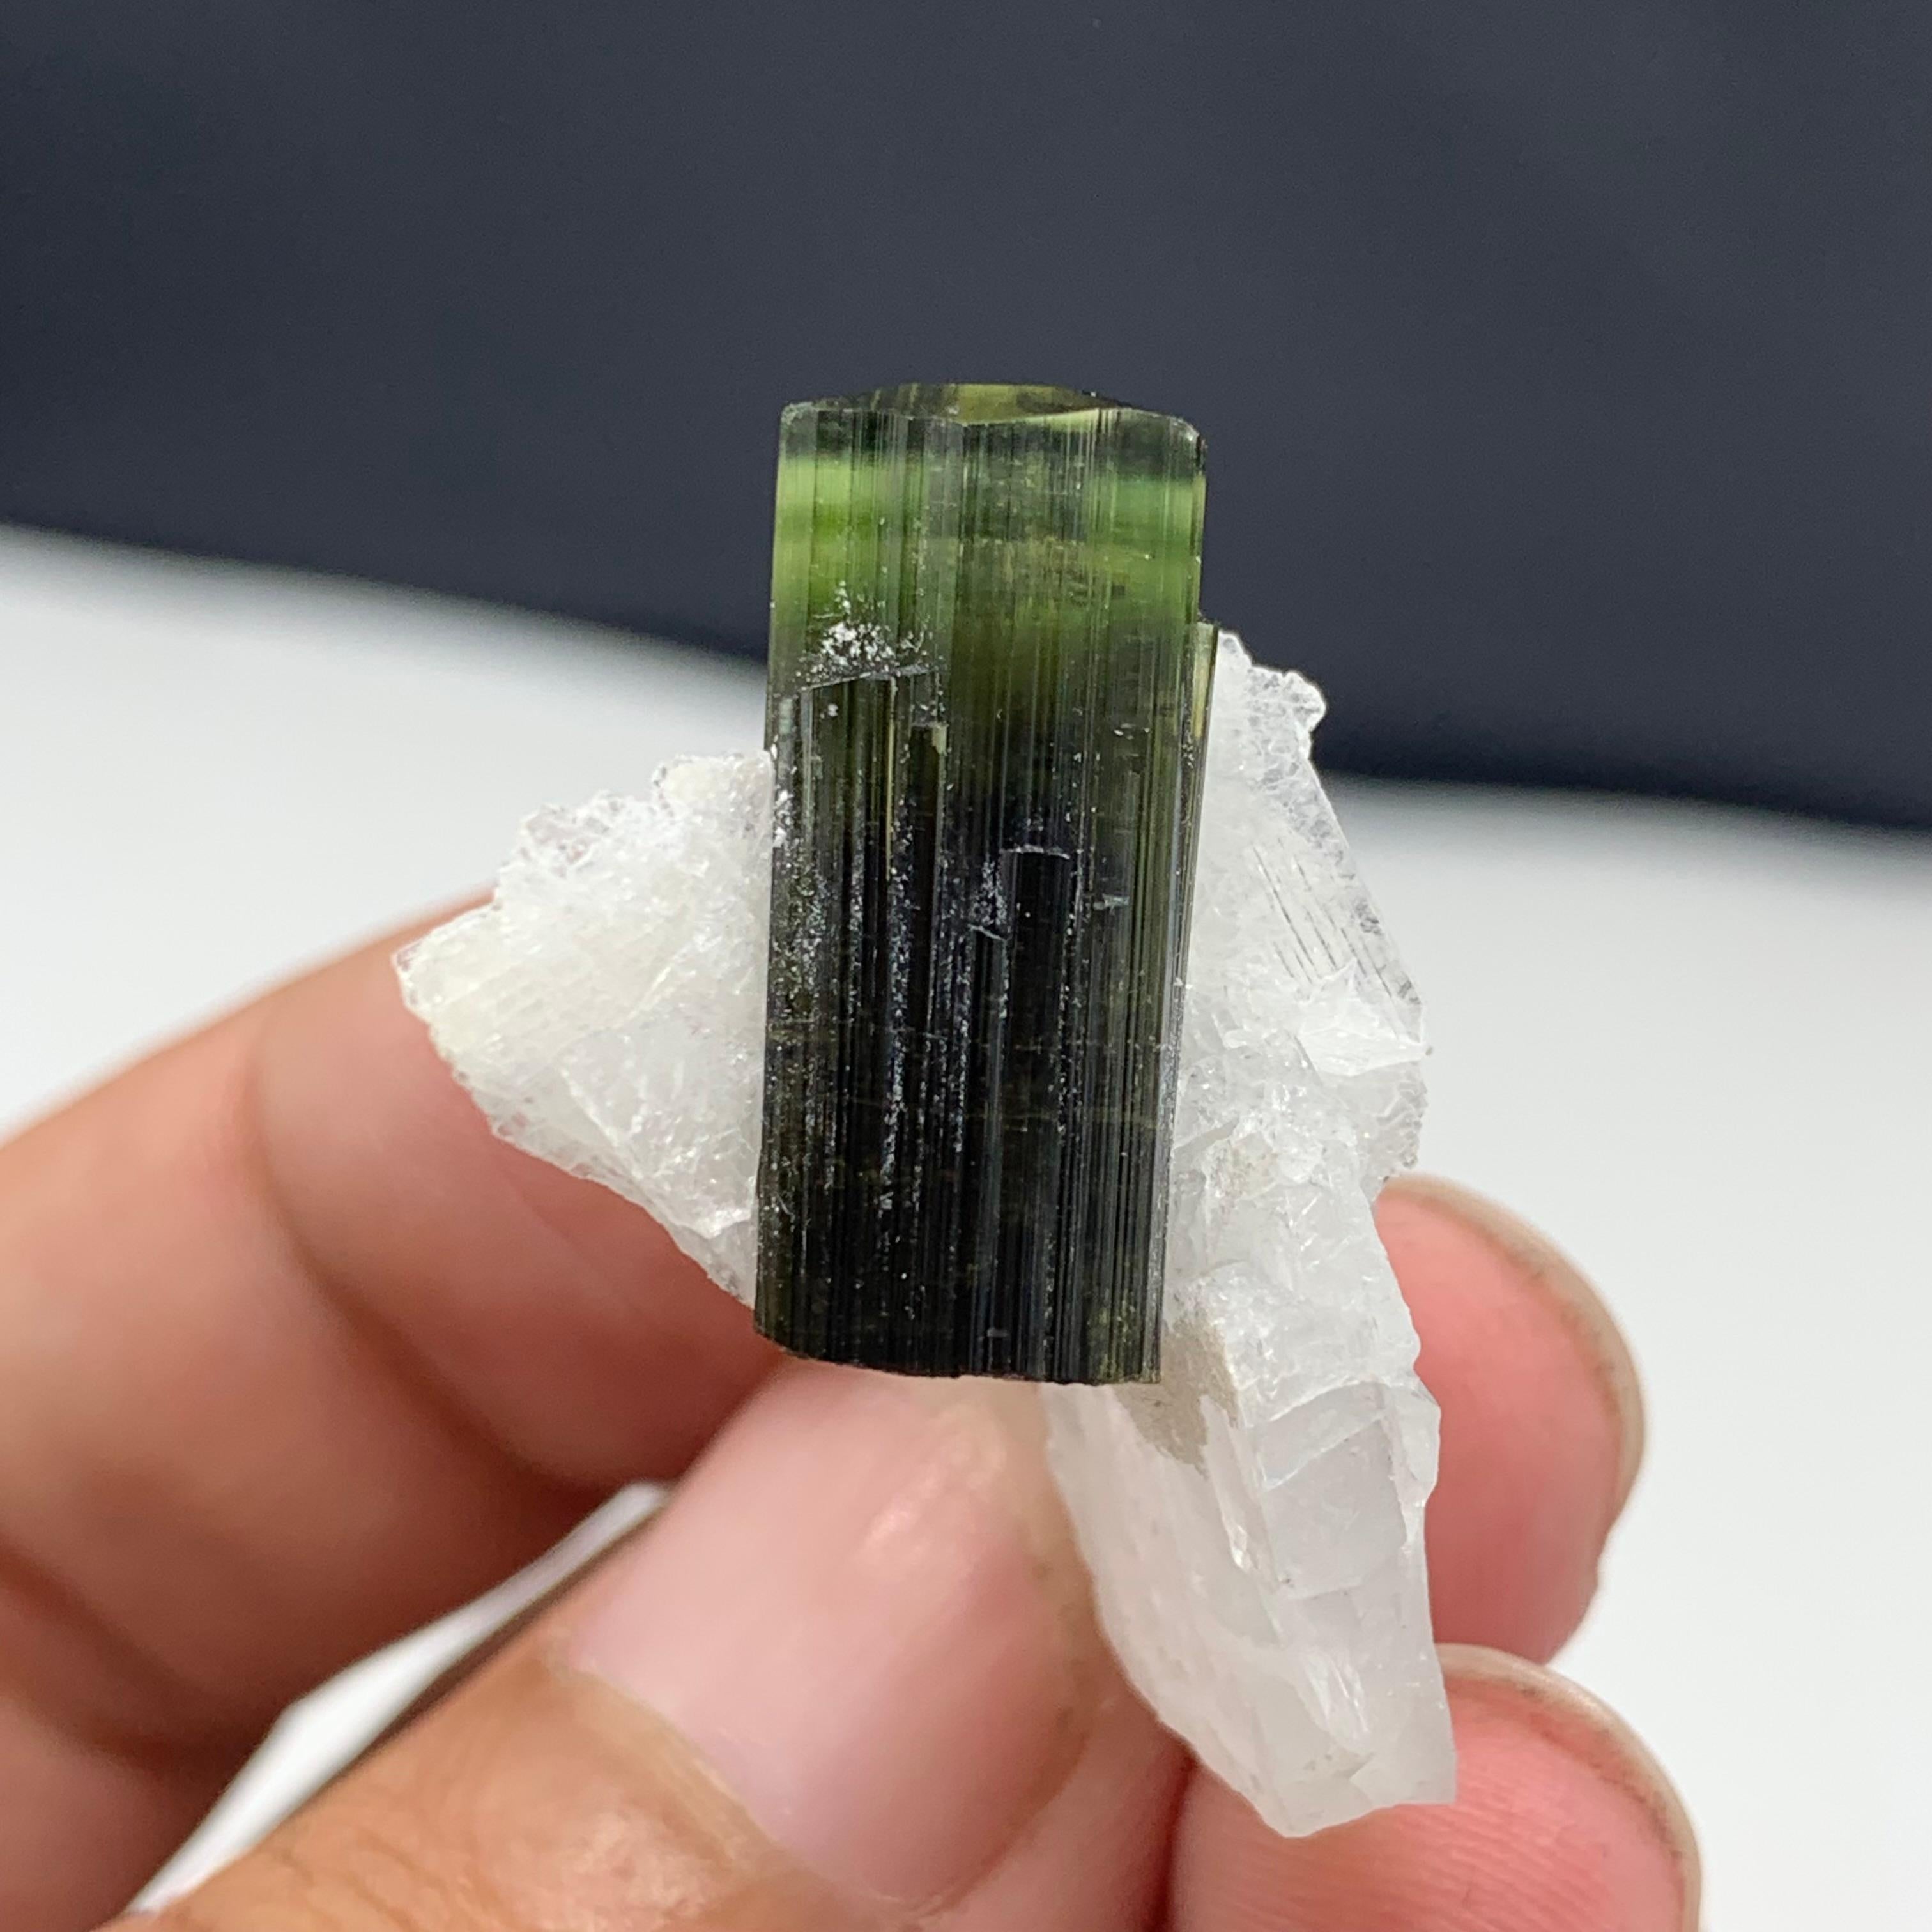 6.58 Gram Adorable Green Tourmaline Specimen with Quartz From Skardu, Pakistan 
Weight: 6.58 Gram 
Dimension: 3.1 x 2.3 x 1.6 Cm 
Origin: Skardu, Pakistan 

Tourmaline is a crystalline silicate mineral group in which boron is compounded with